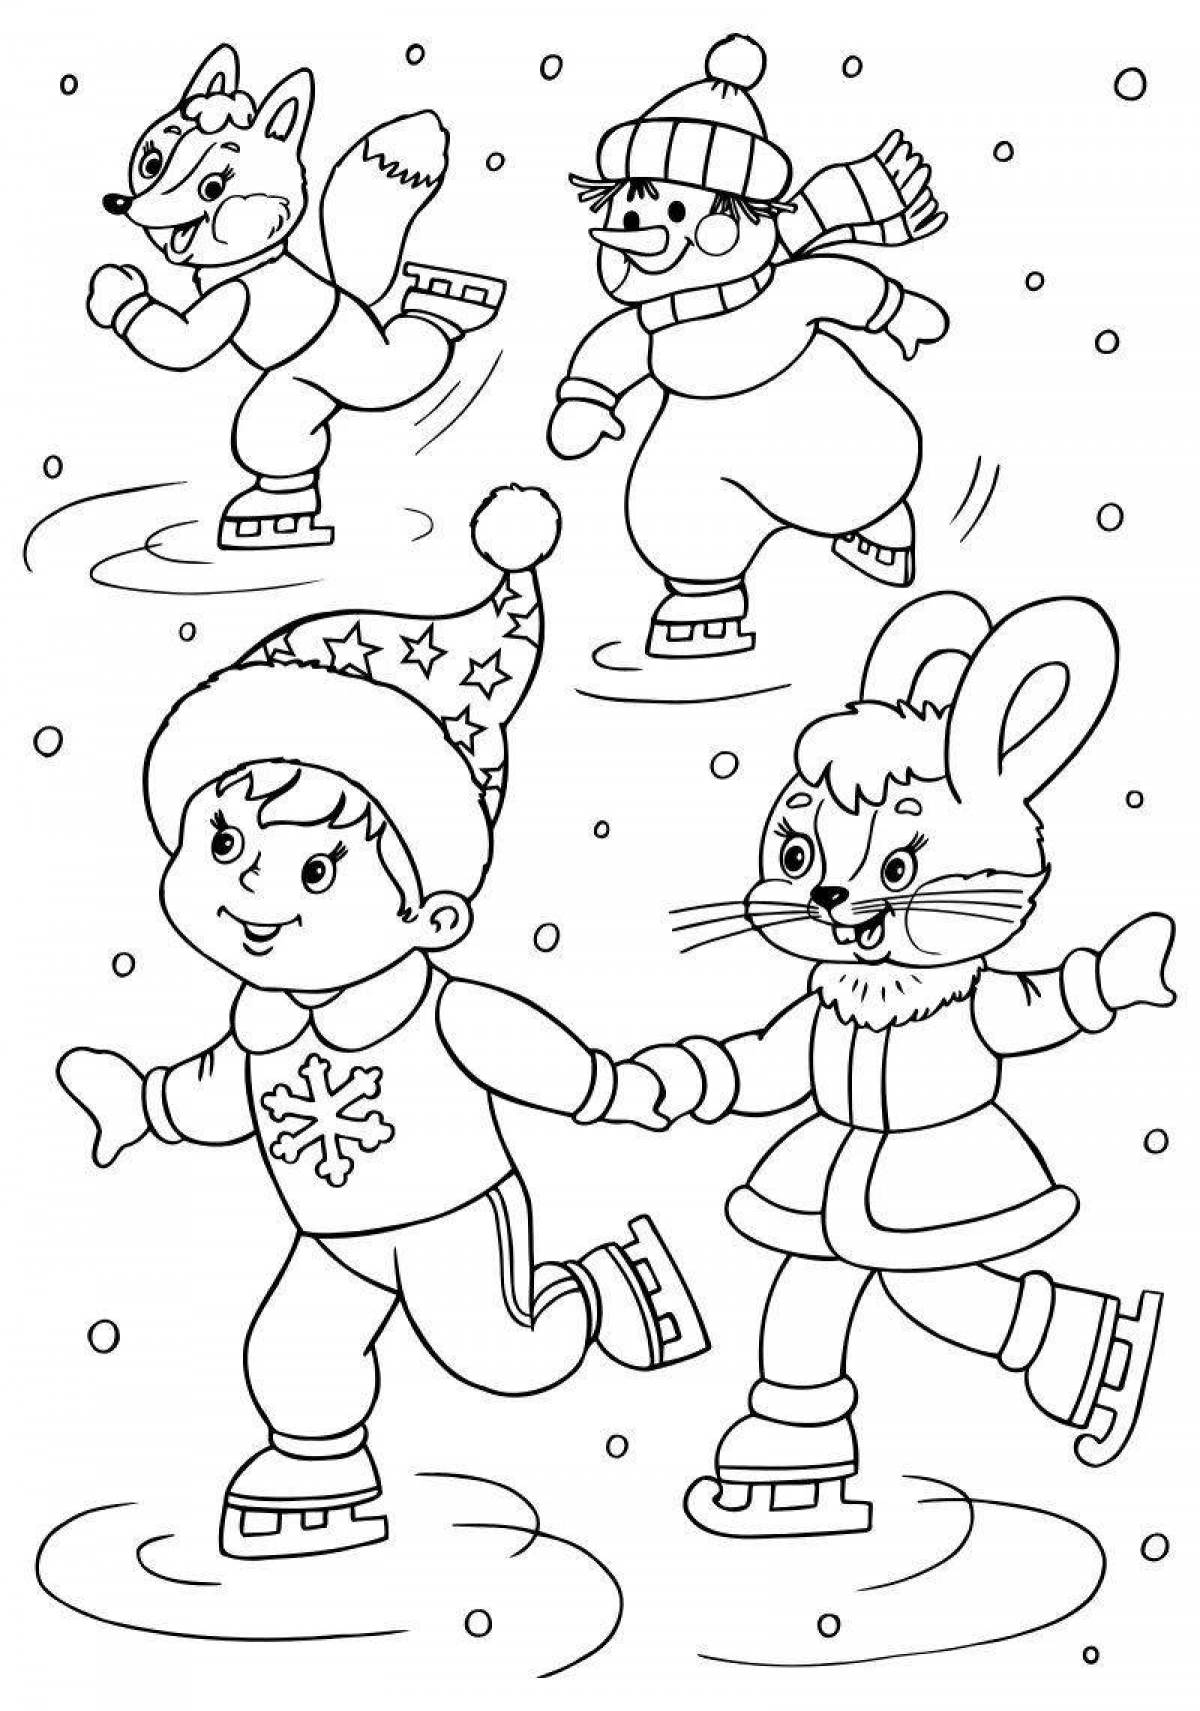 Glitter winter Christmas coloring book